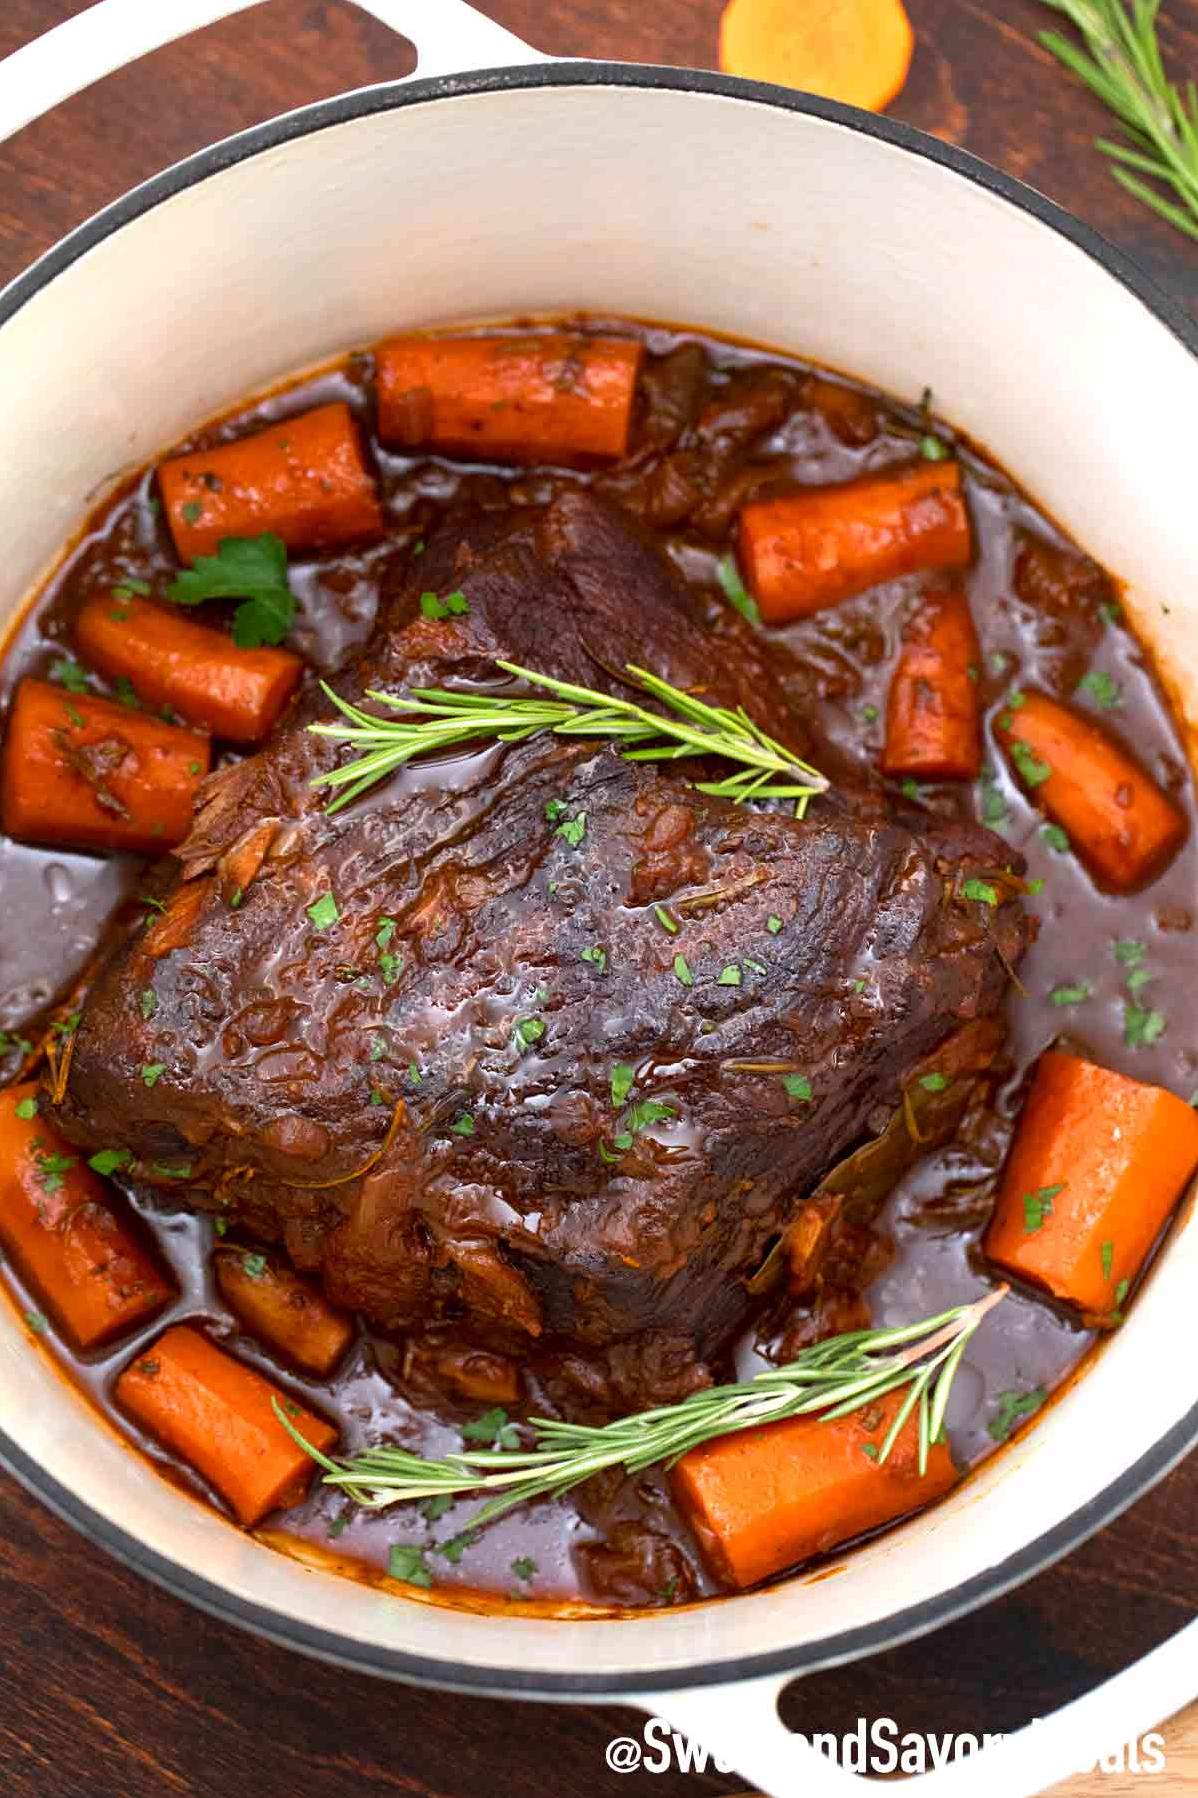  One bite of this slow-cooked pot roast will transport you to a cozy Sunday dinner.